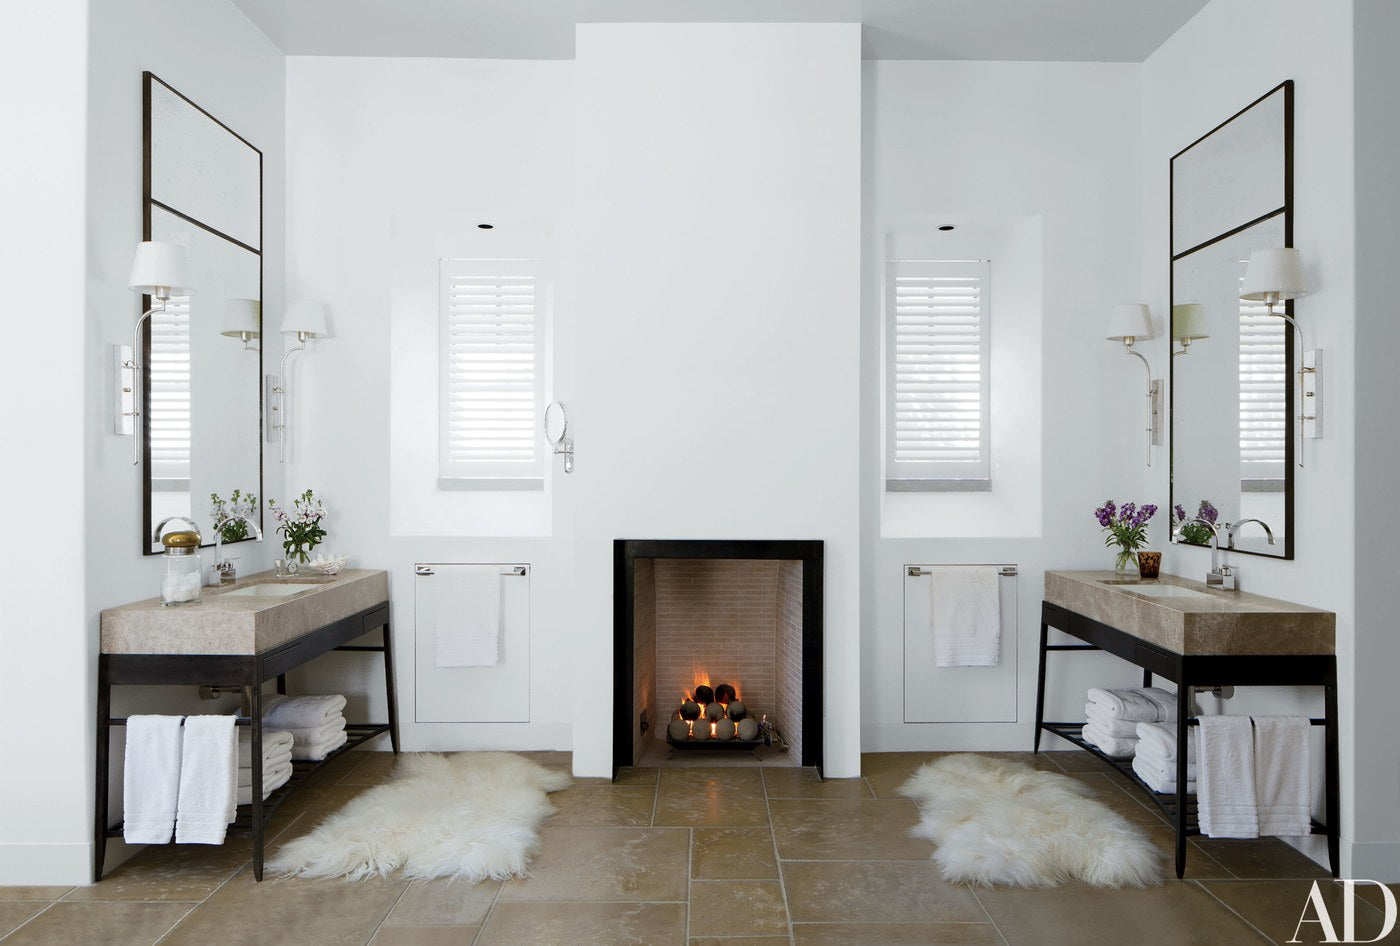 And I wanted to keep the bathrooms simple and functional, without frou frou tile or any other accoutrements, but preferably with a fireplace. (Bobby McAlpine design, photo by Roger Davies for AD.)